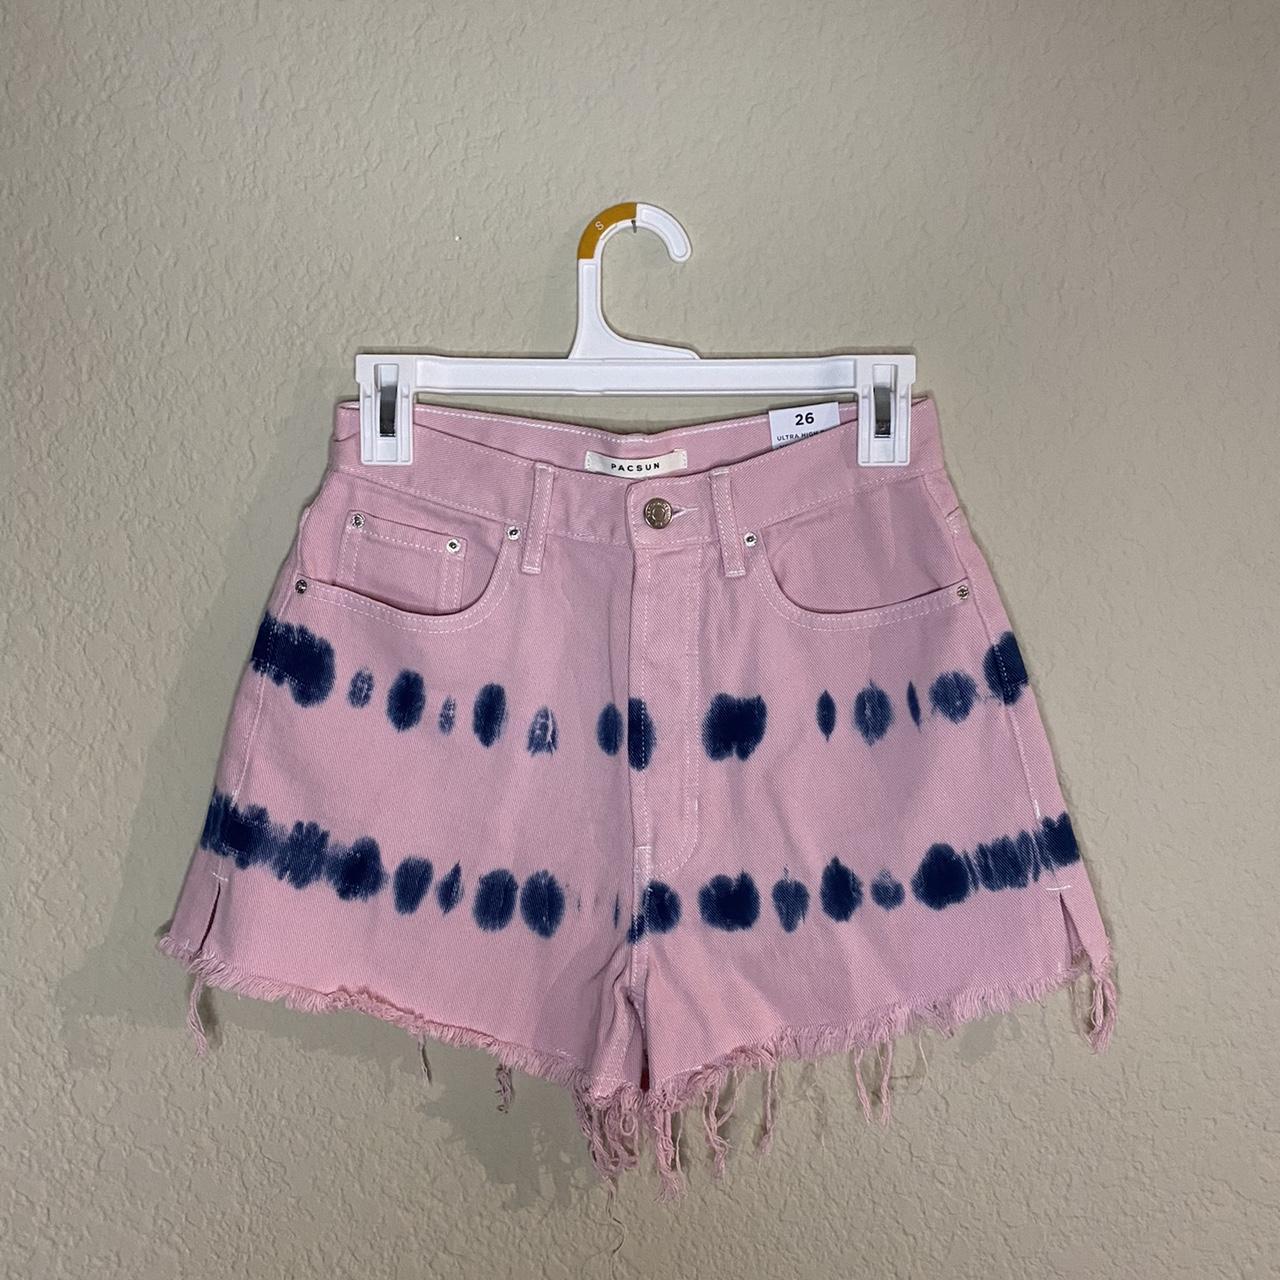 PacSun Women's Pink and Blue Shorts